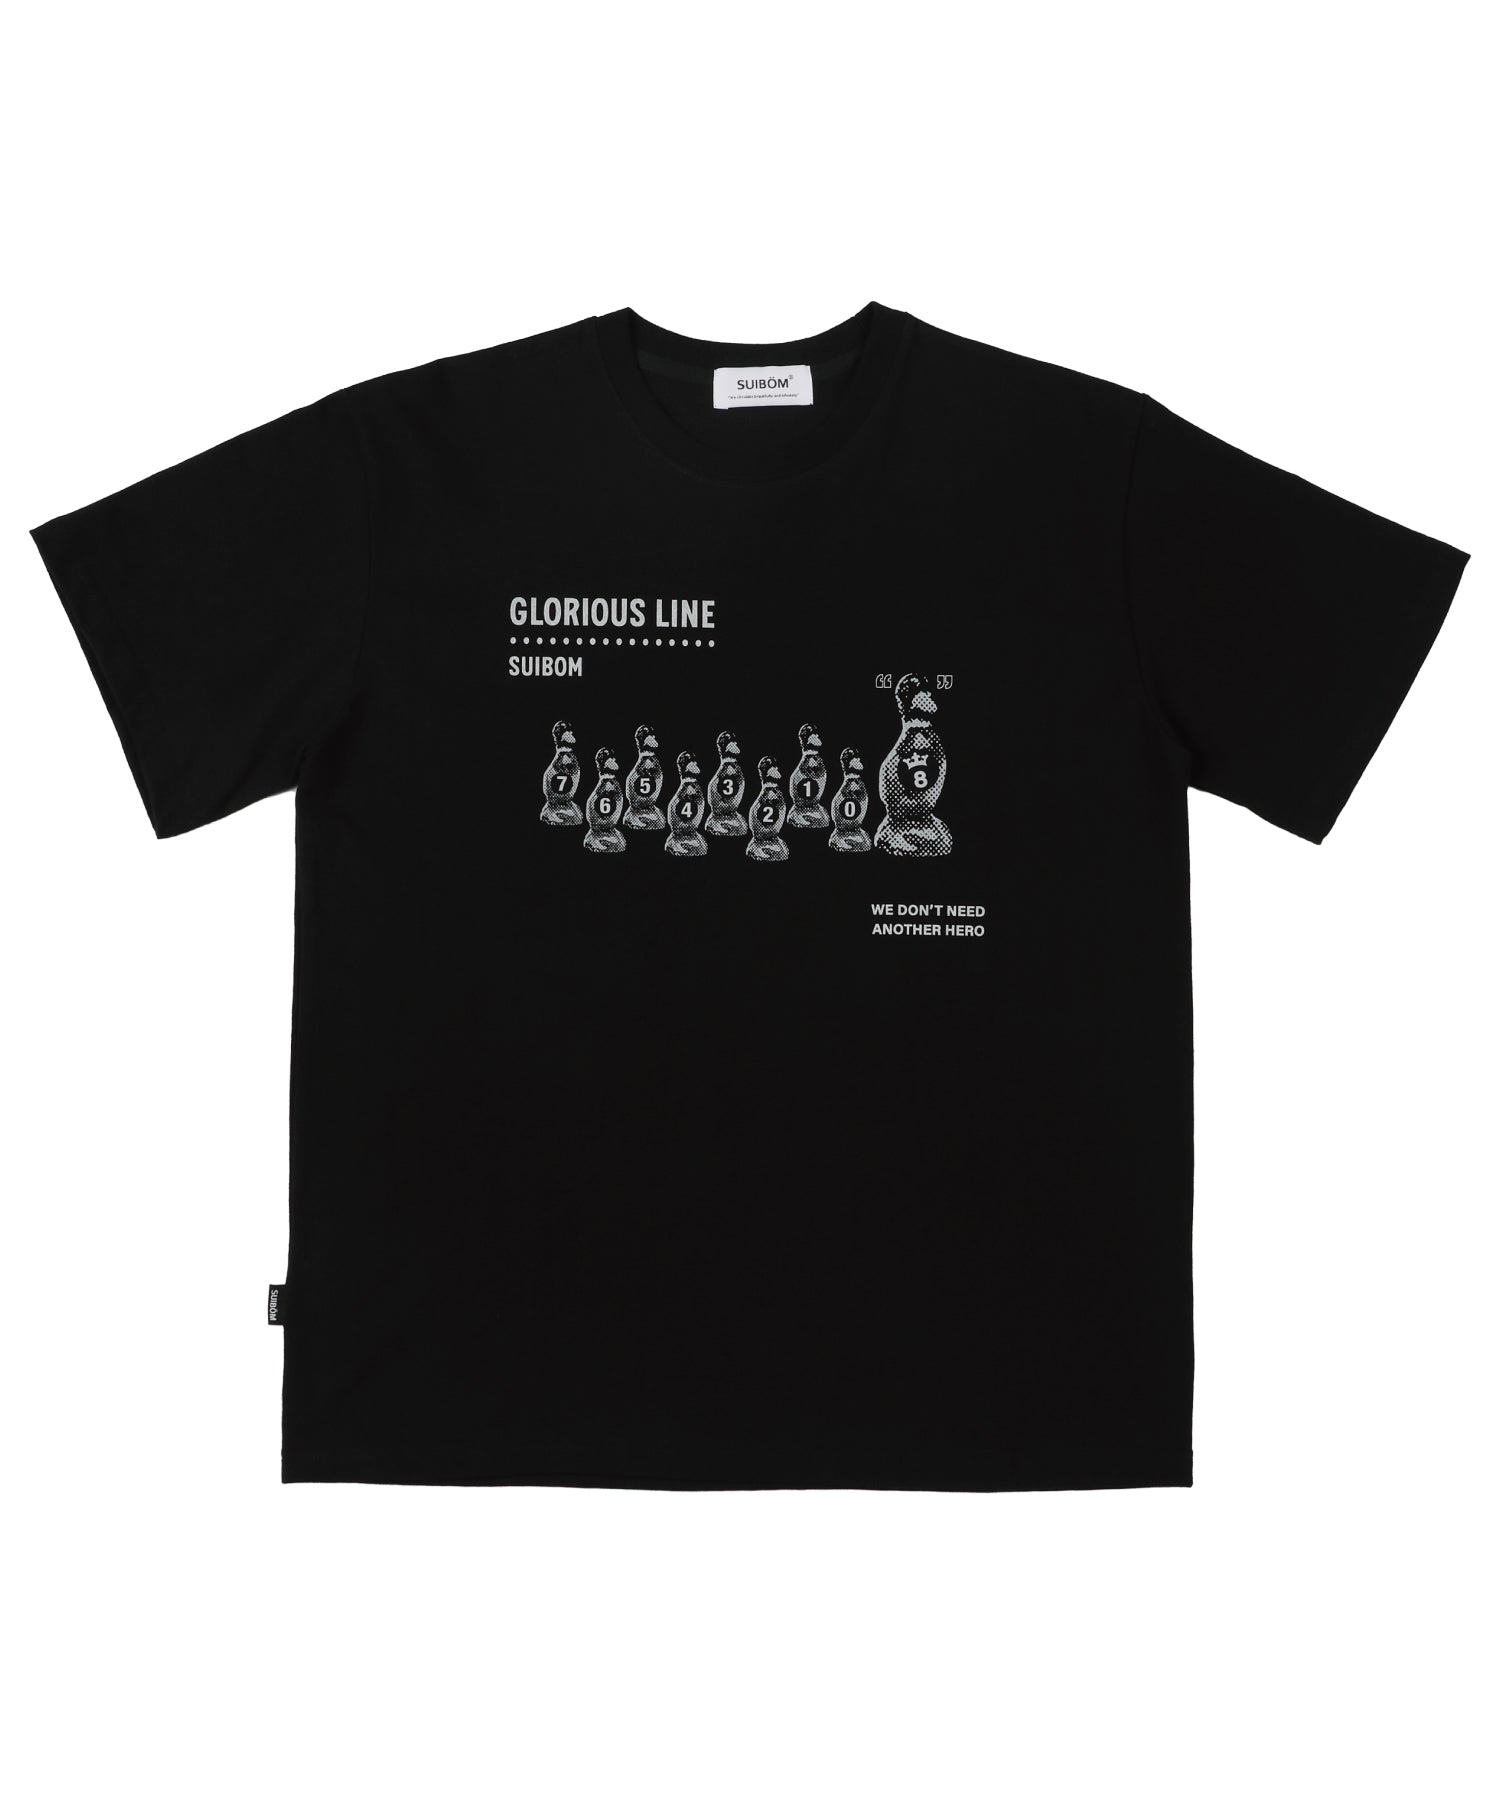 GLORIOUS LINE T-Shirt in Black